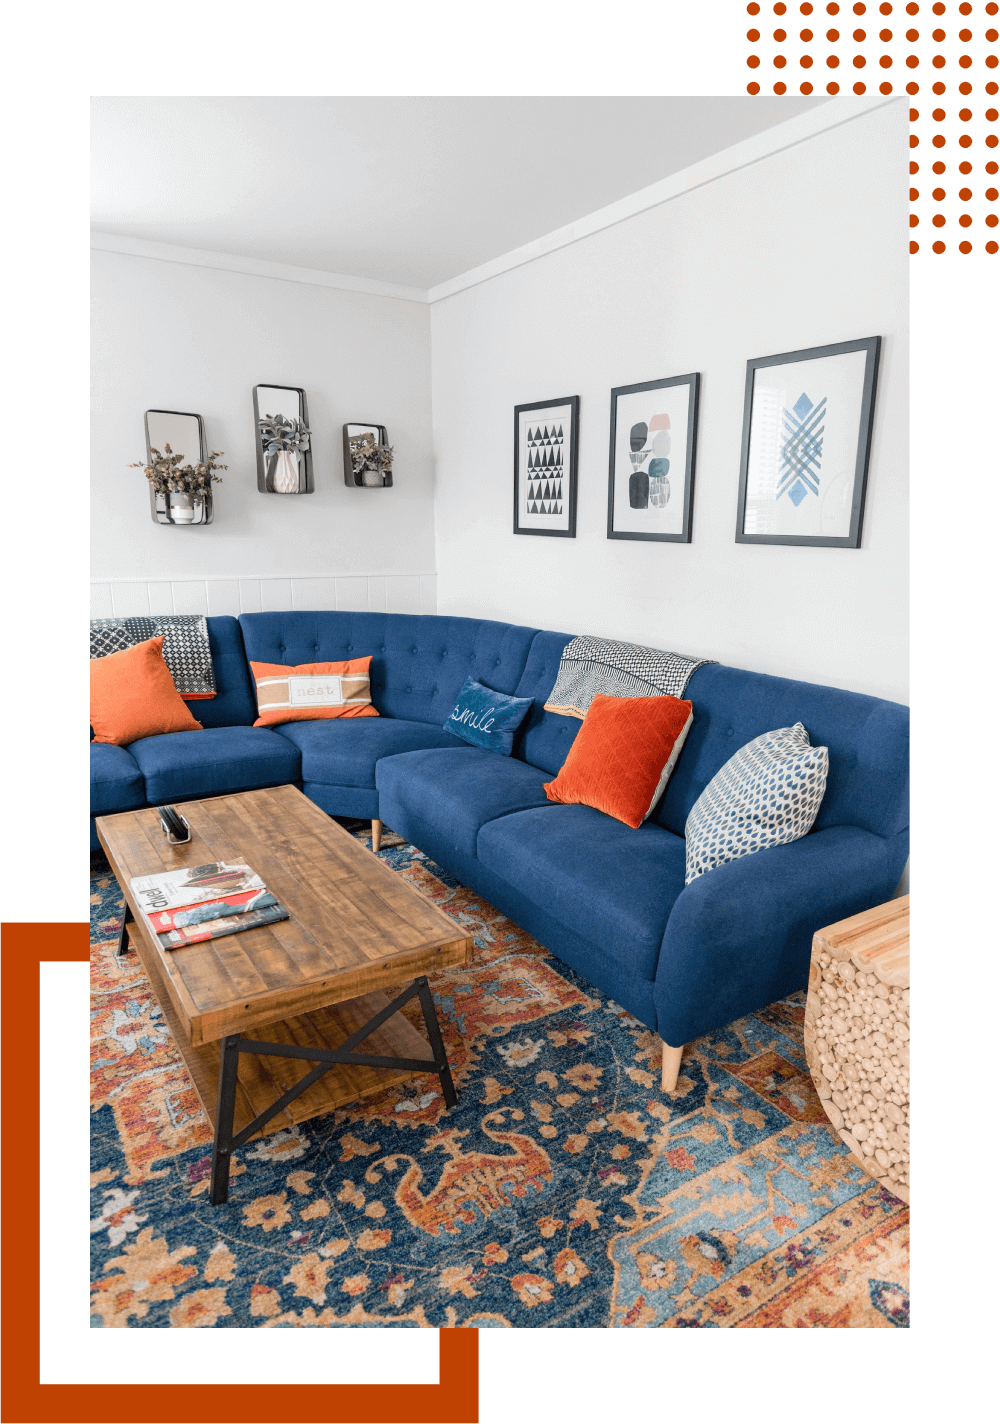 A living room with blue couches and orange pillows.